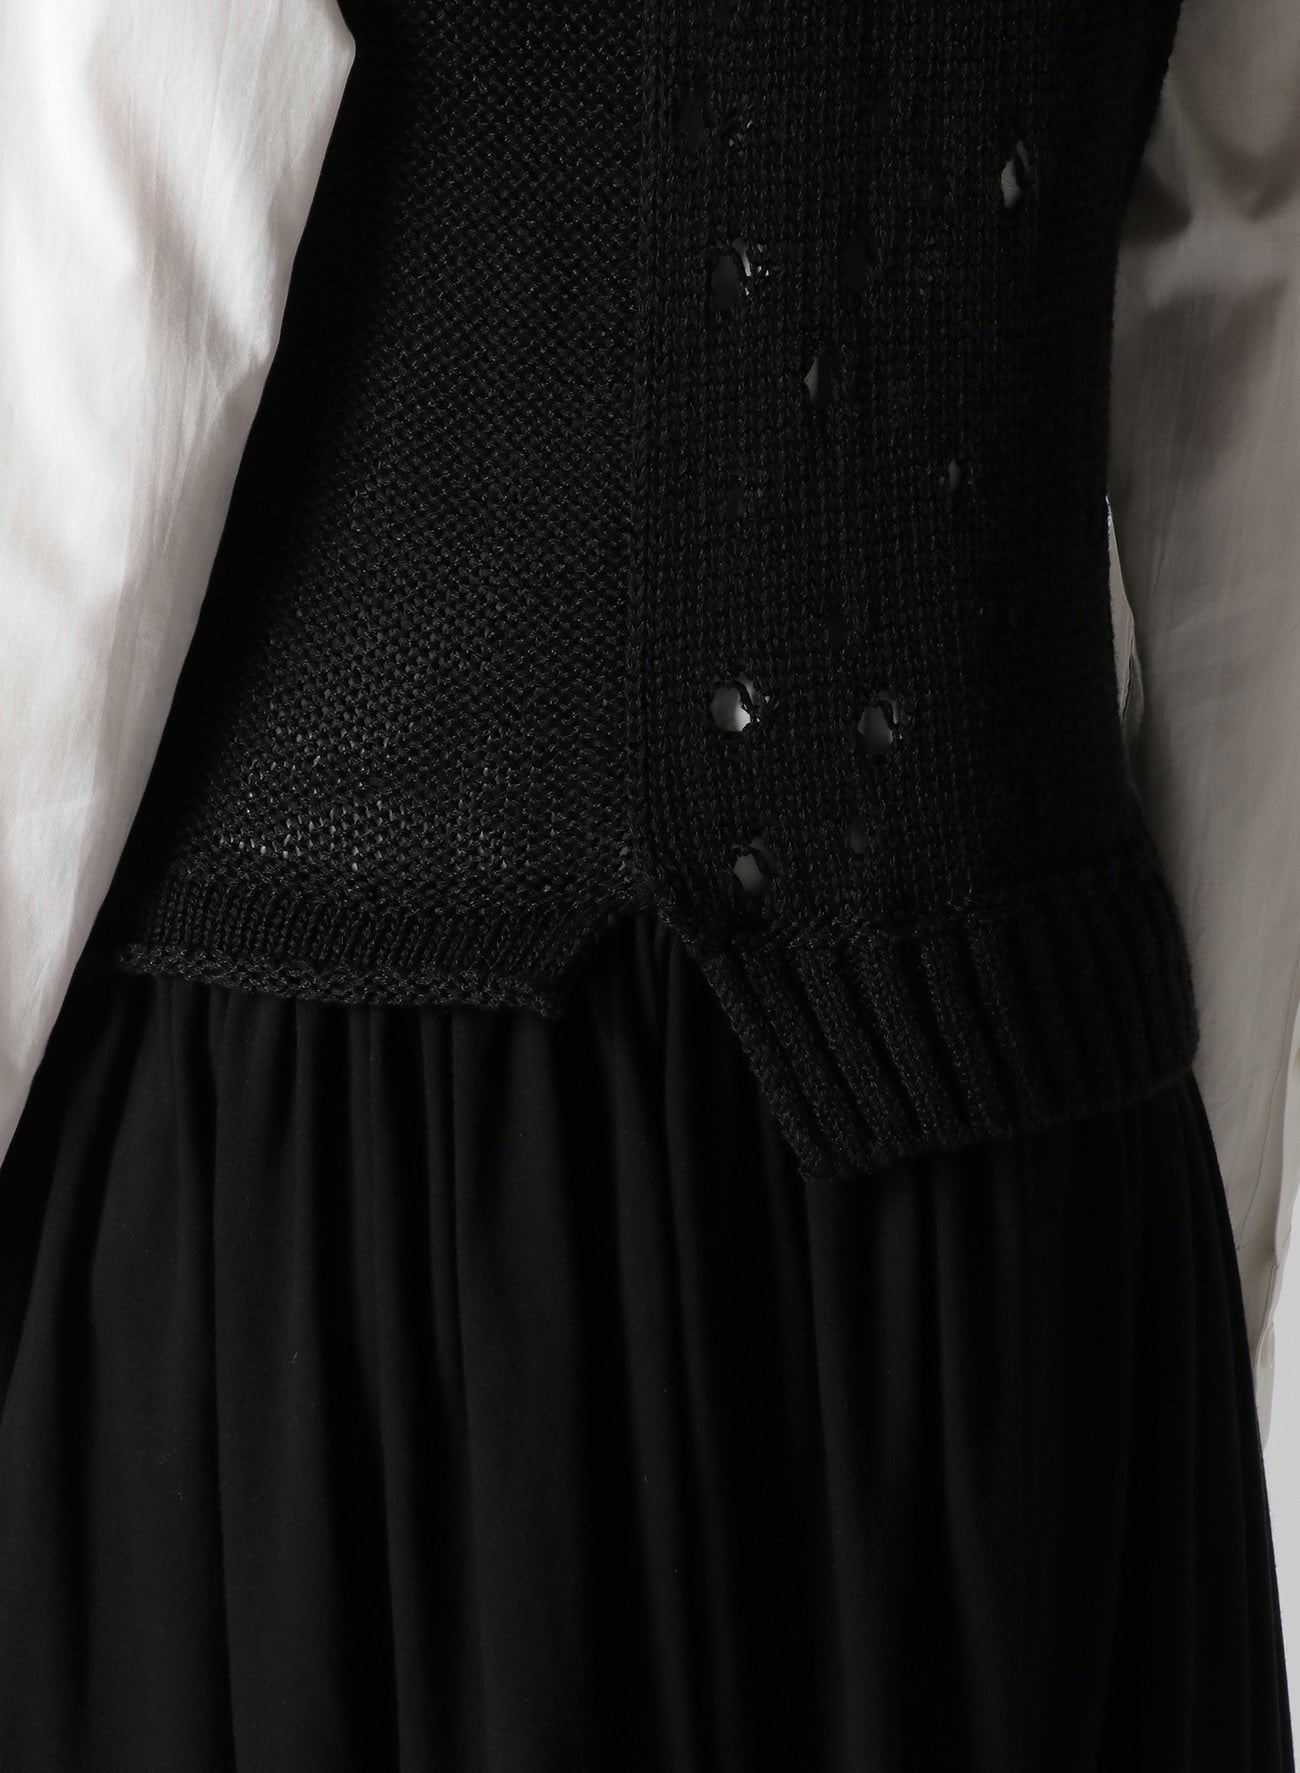 SLEEVELESS DRESS WITH OPENWORKED KNIT(S Black): Y's｜THE SHOP 